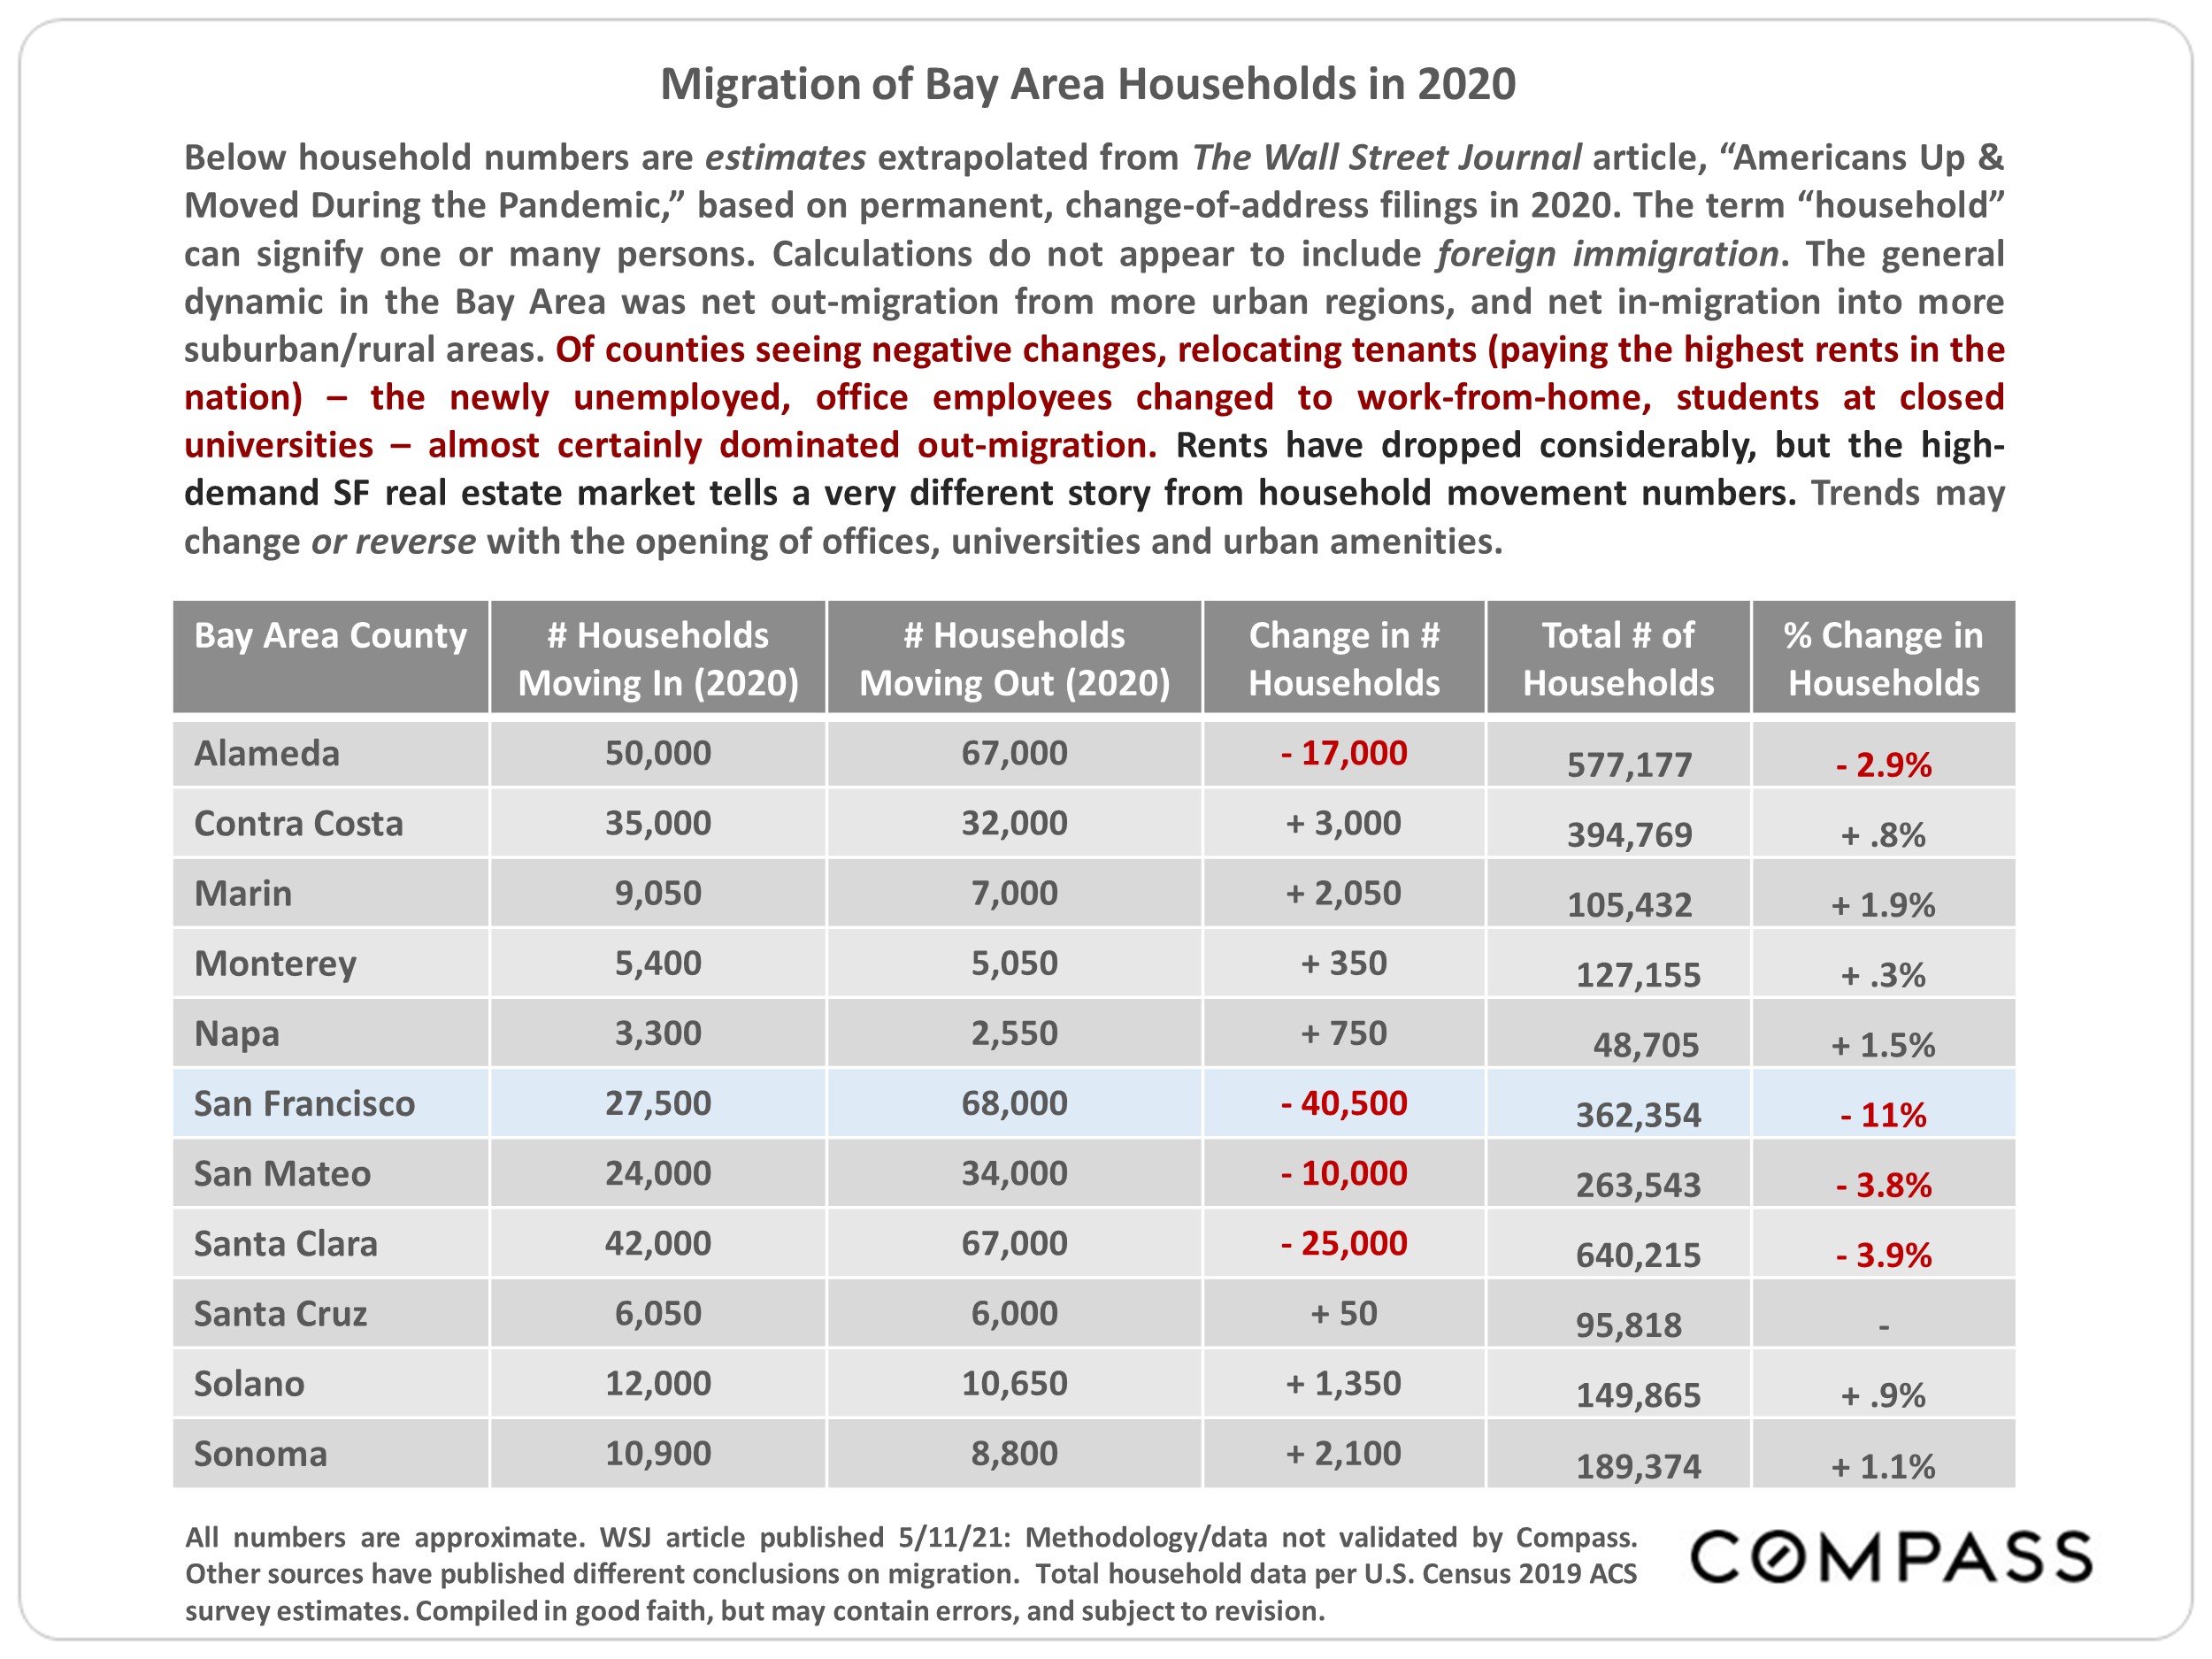 Data showing the Migration of Bay Area Households in 2020